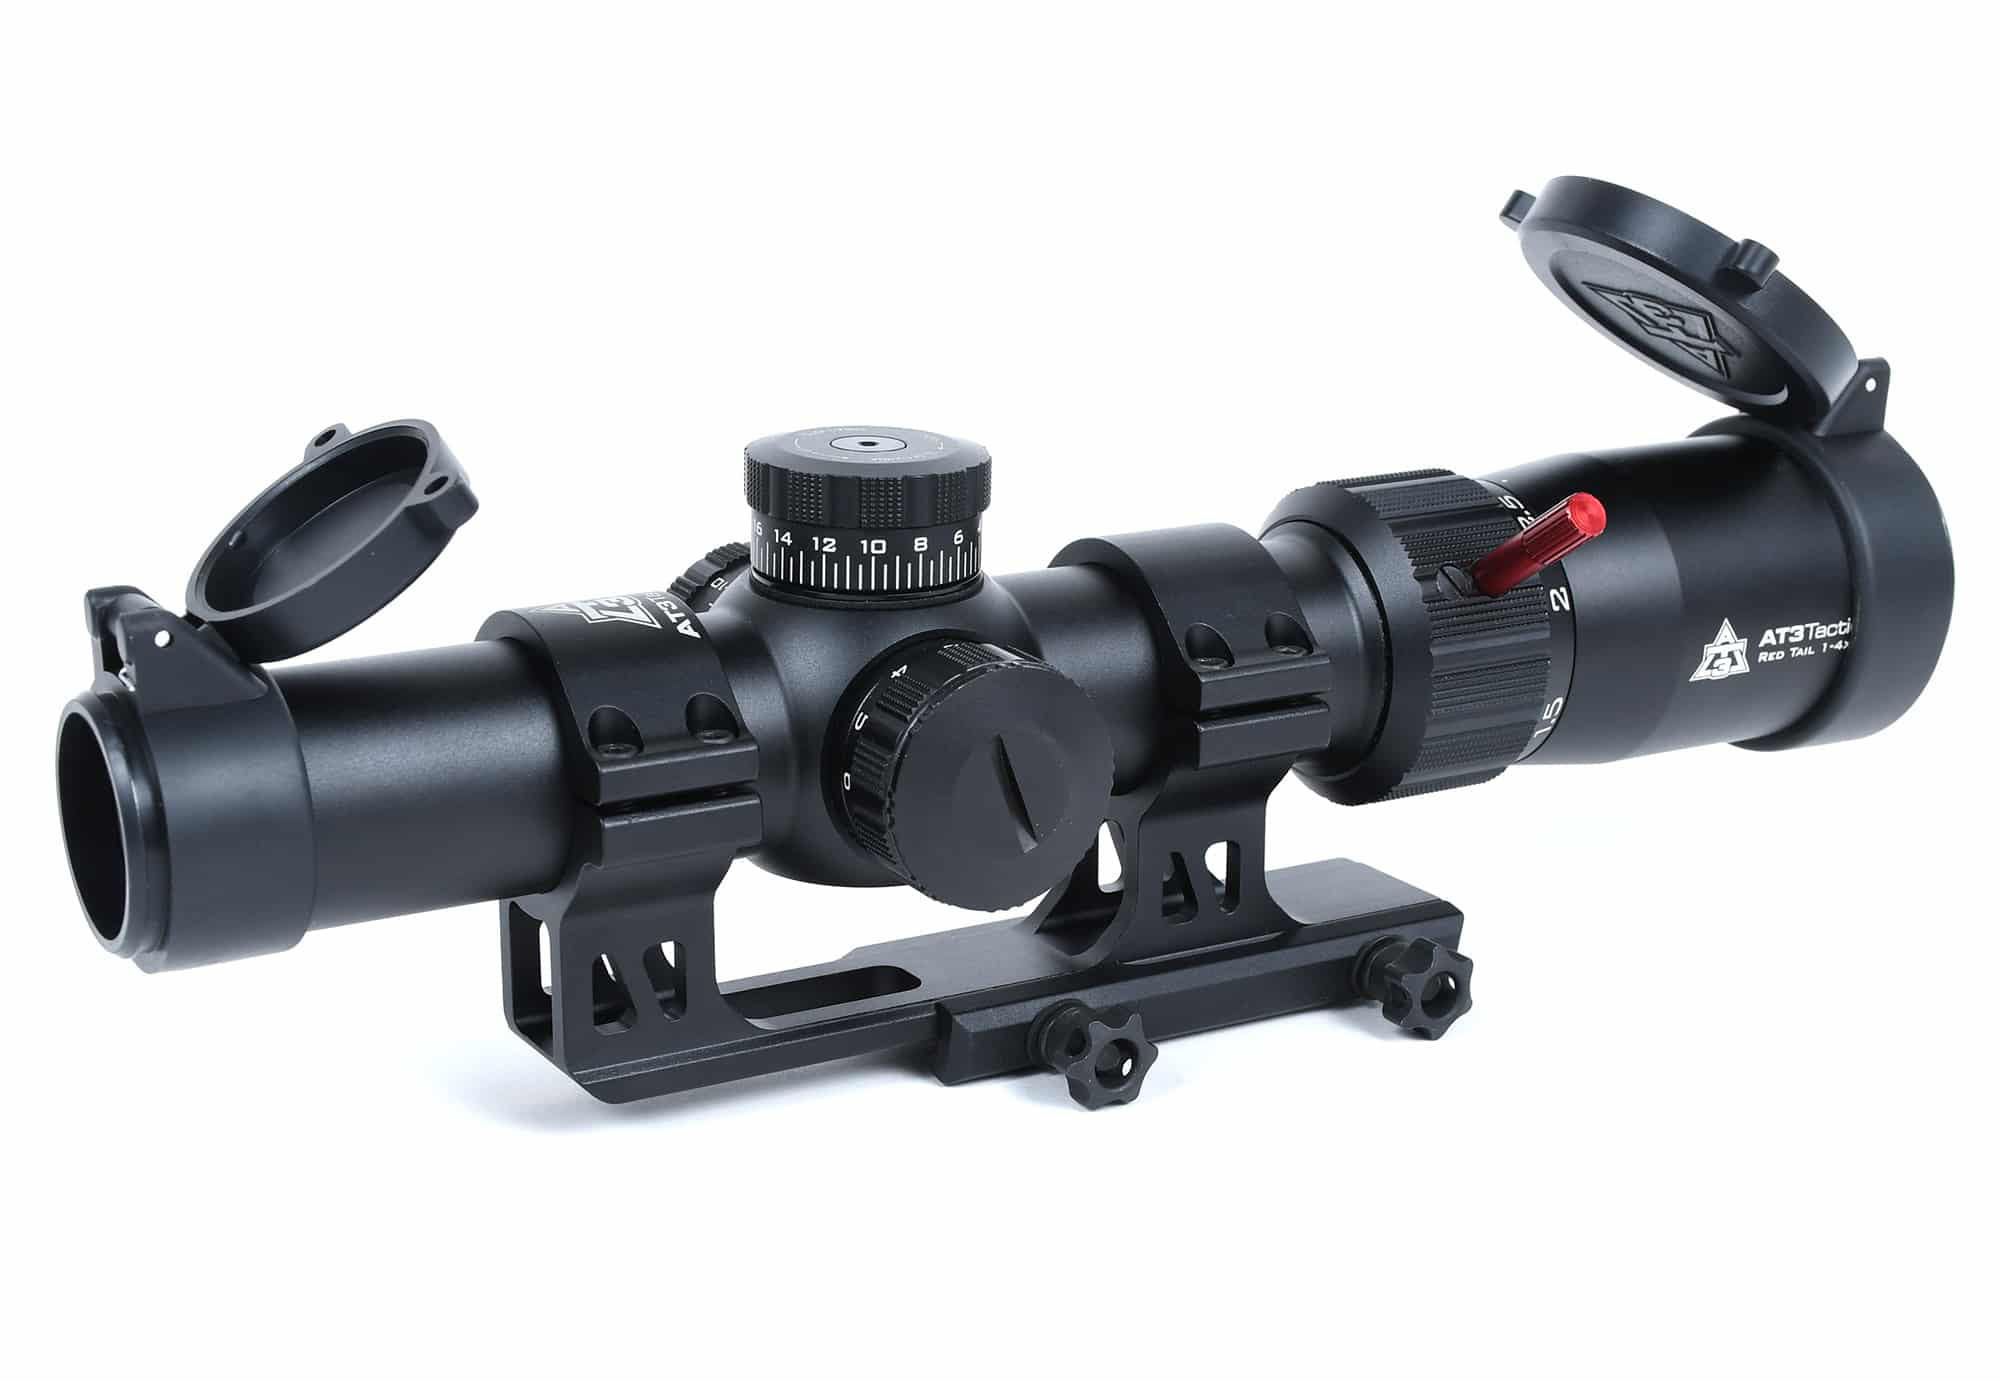 Винтовка с оптикой. Mepro Hunter Sniper's Night Vision Weapon Sight with x4 or x6 Magnification..